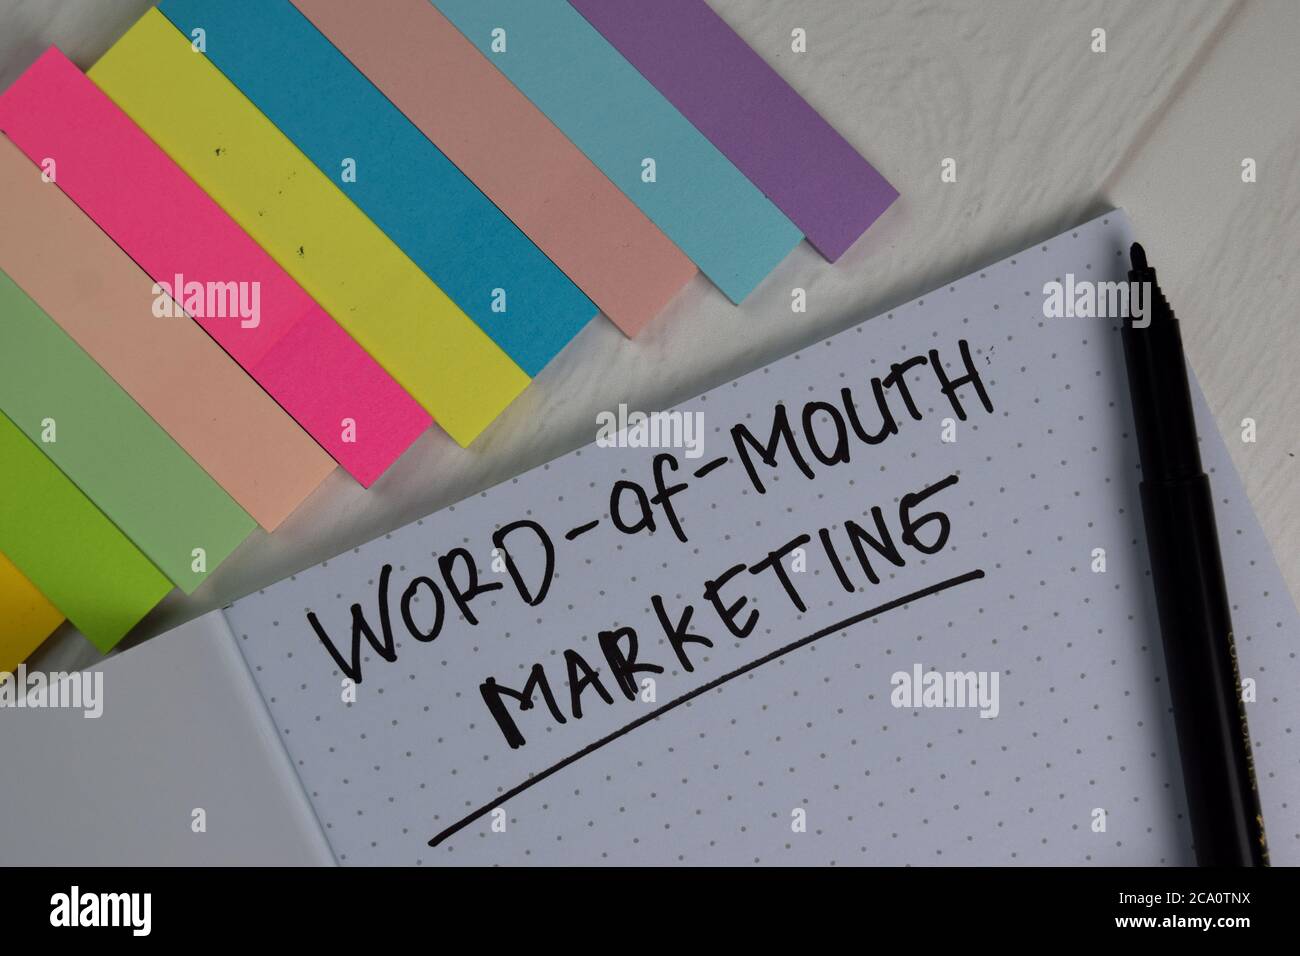 Word-of-Mouth Marketing write on a book isolated wooden table. Stock Photo